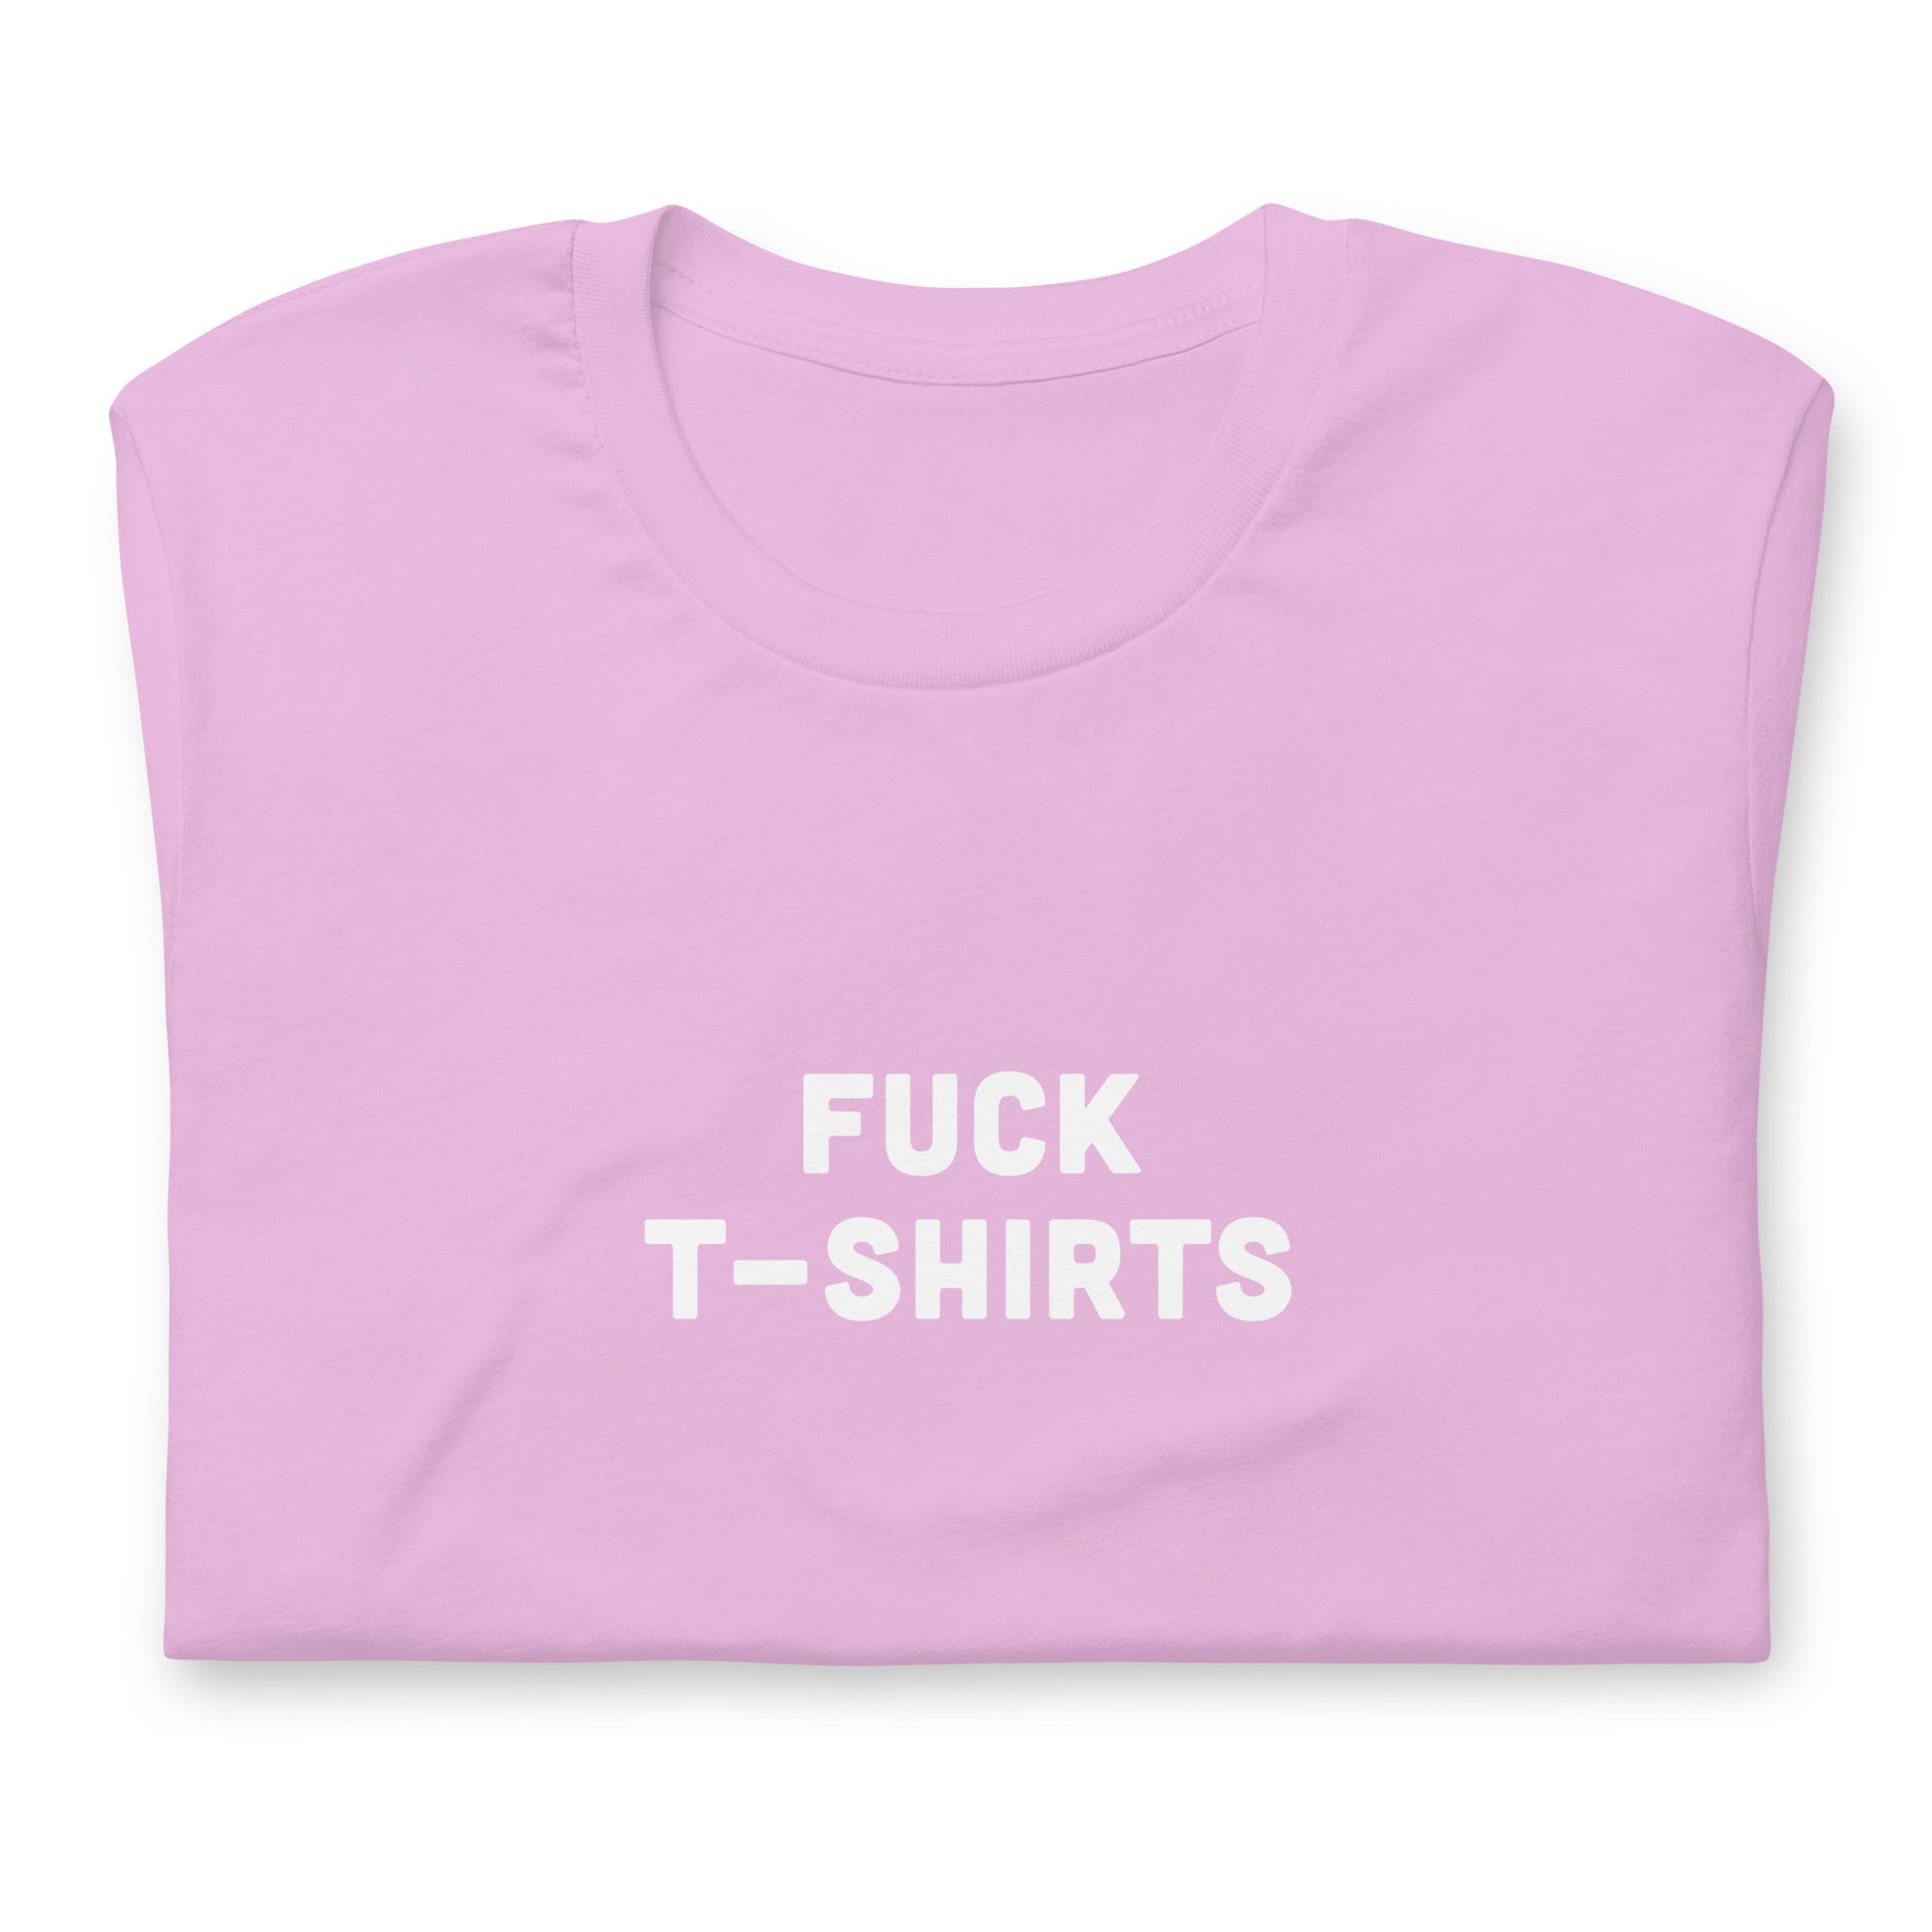 Fuck T-Shirts T-Shirt Size 2XL Color Forest